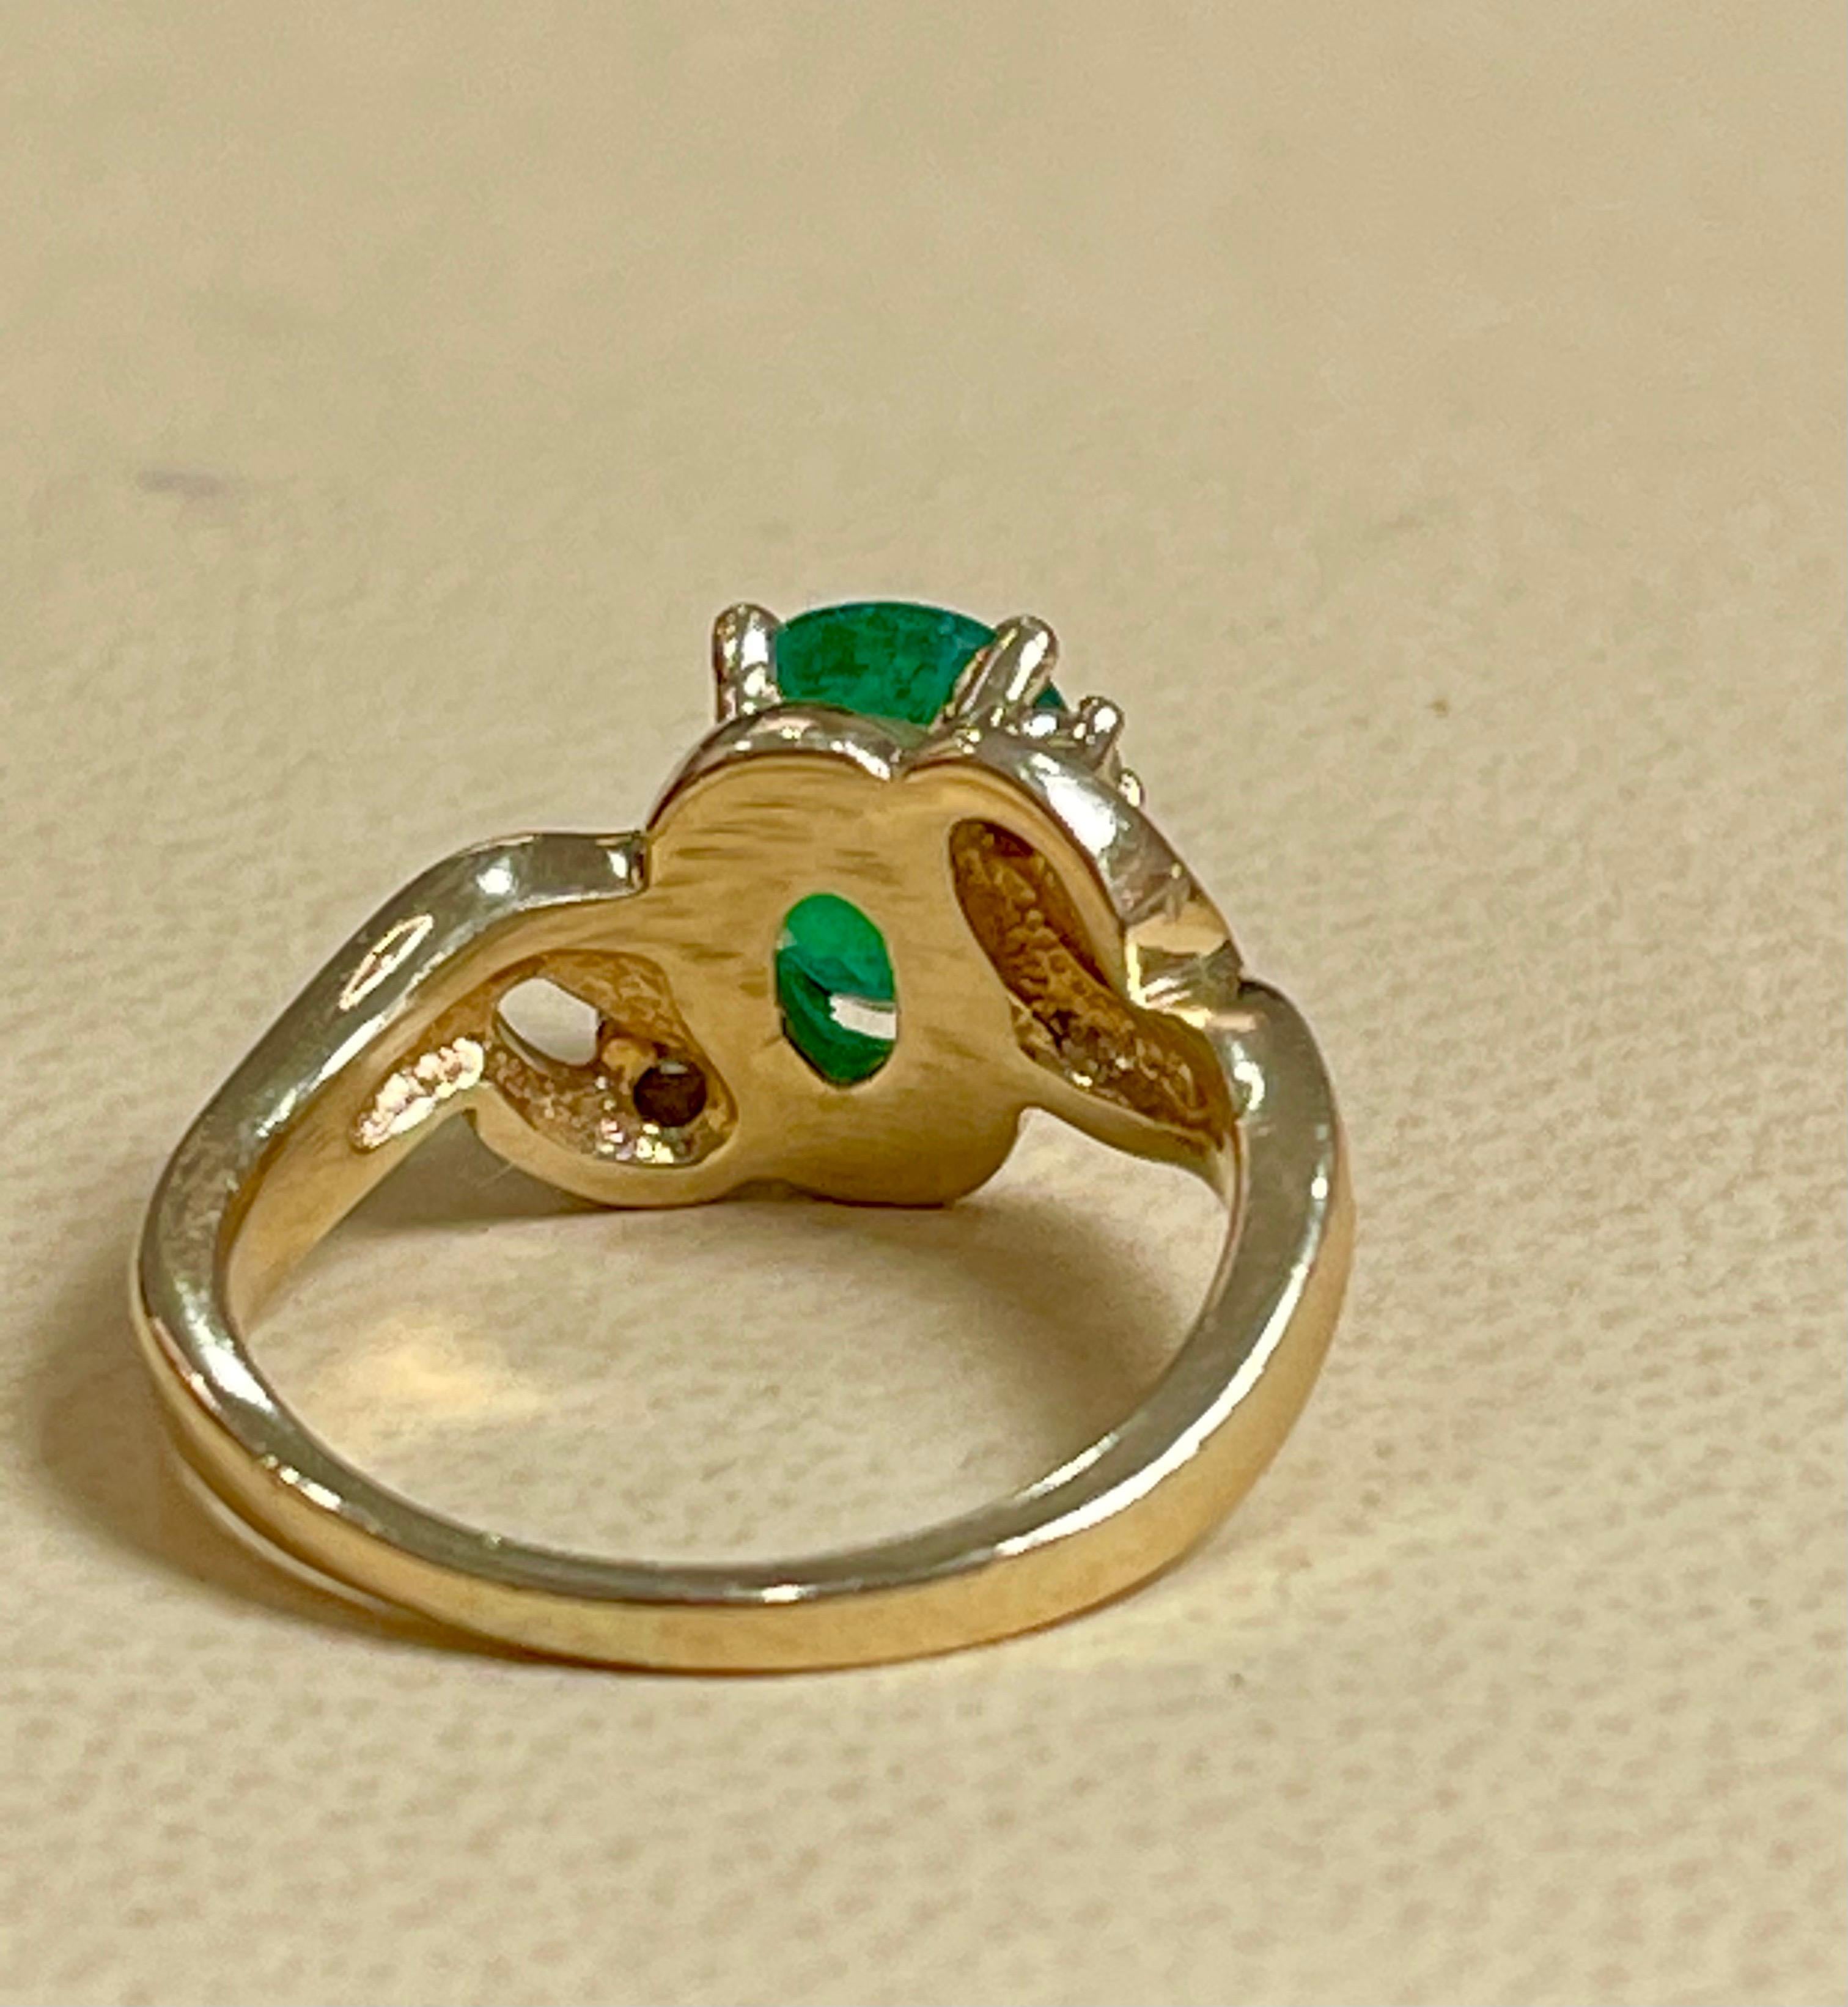 Women's 1.8 Carat Natural Oval Emerald and Diamond Ring 14 Karat Yellow Gold For Sale